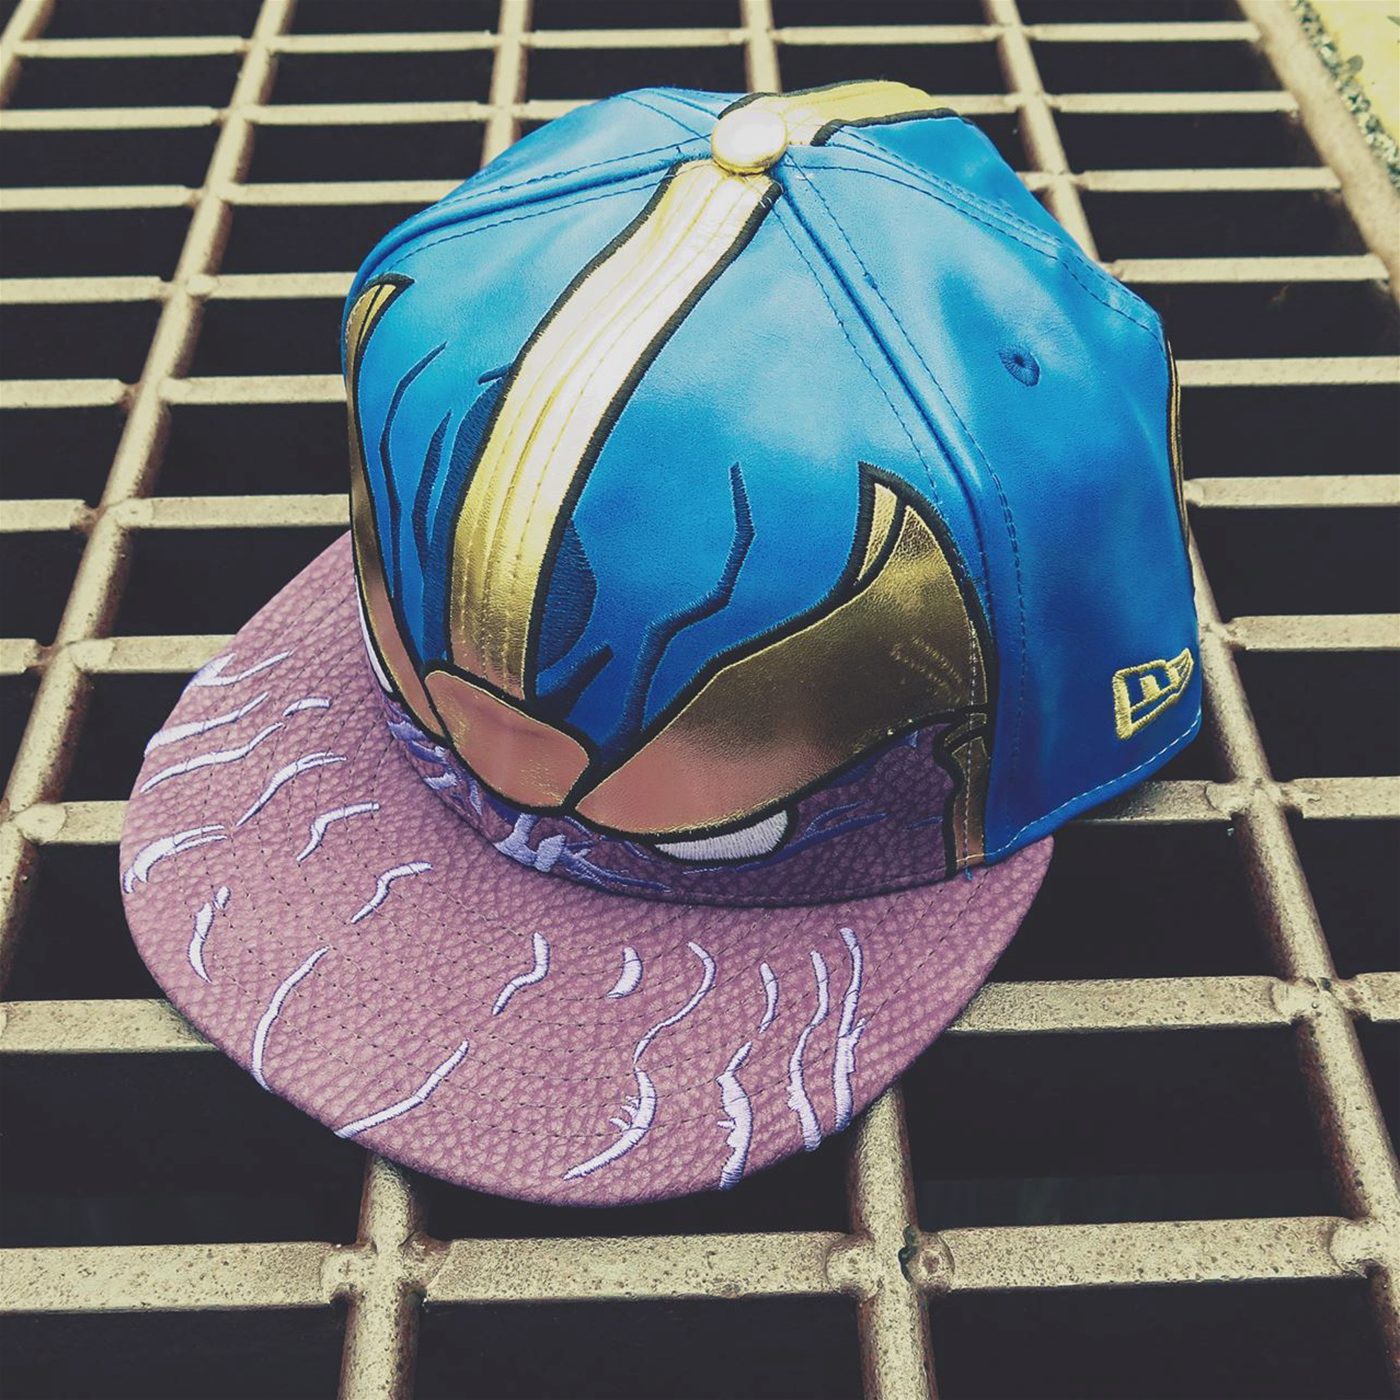 Thanos Armor 59Fifty Fitted Hat